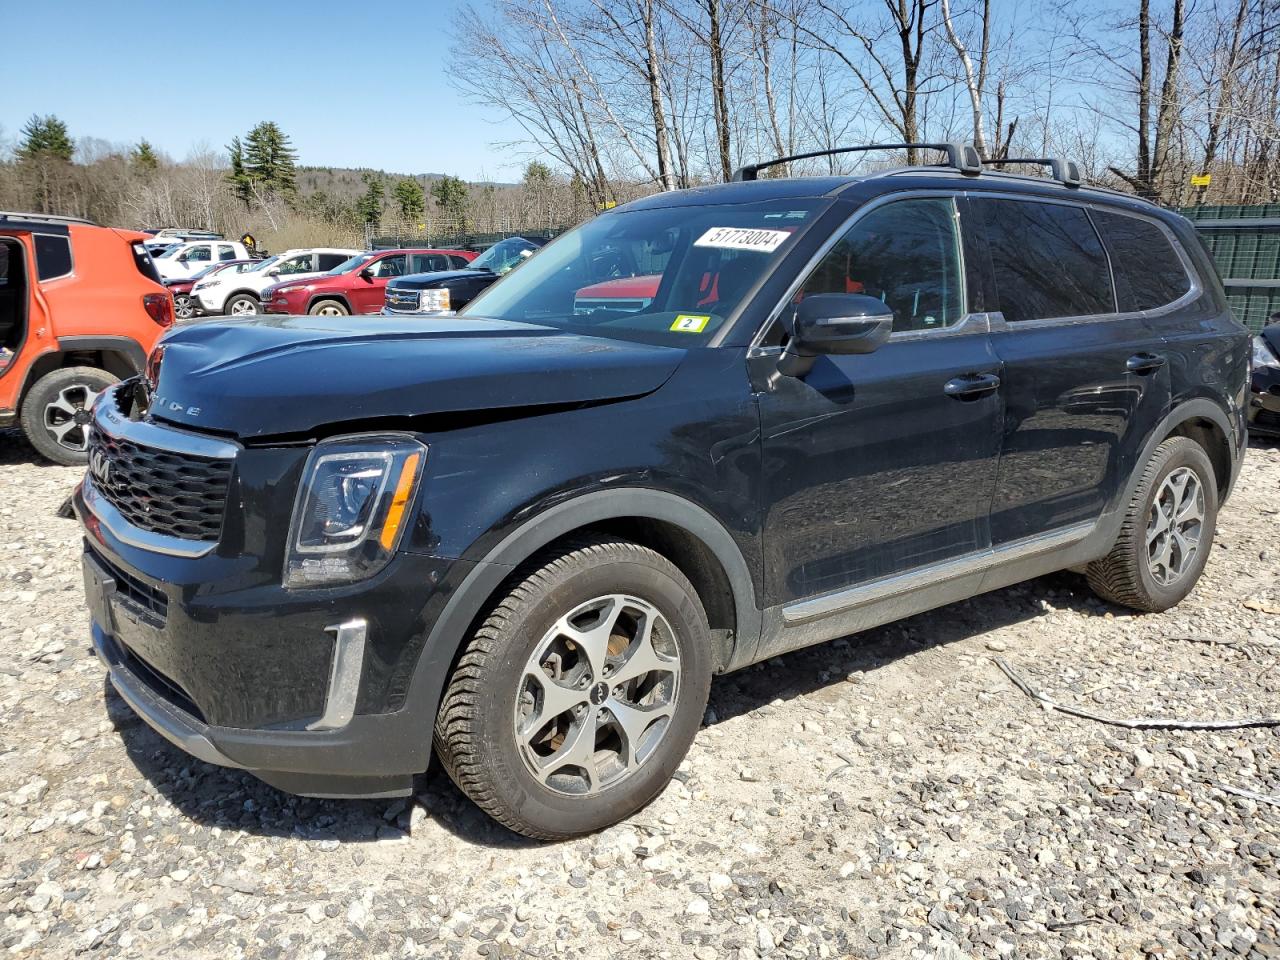 vin: 5XYP3DHC7NG229899 5XYP3DHC7NG229899 2022 kia telluride 3800 for Sale in 03034 2111, Nh - Candia, Candia, New Hampshire, USA